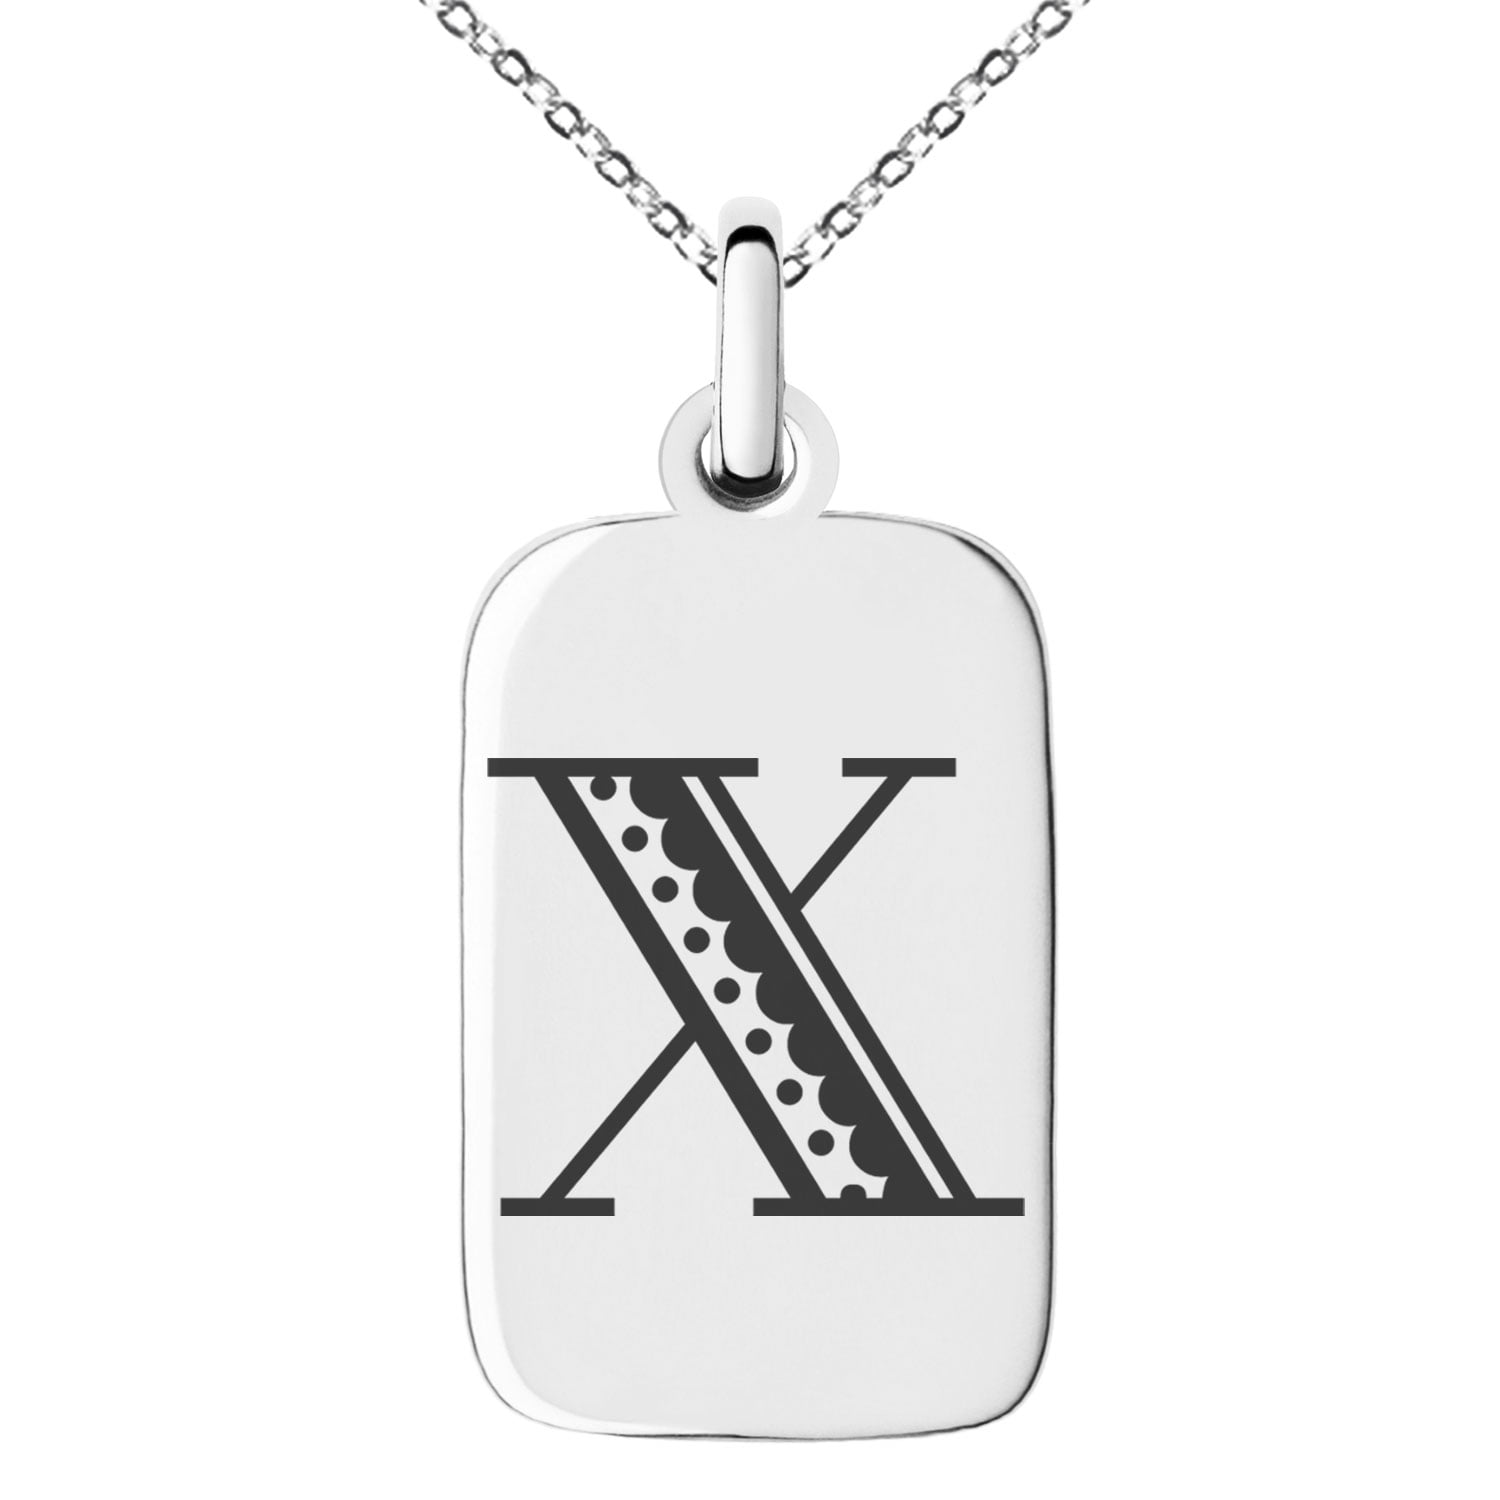 Tioneer Stainless Steel Letter X Initial Metro Retro Monogram Floating Heart Tag Charm Pendant Necklace